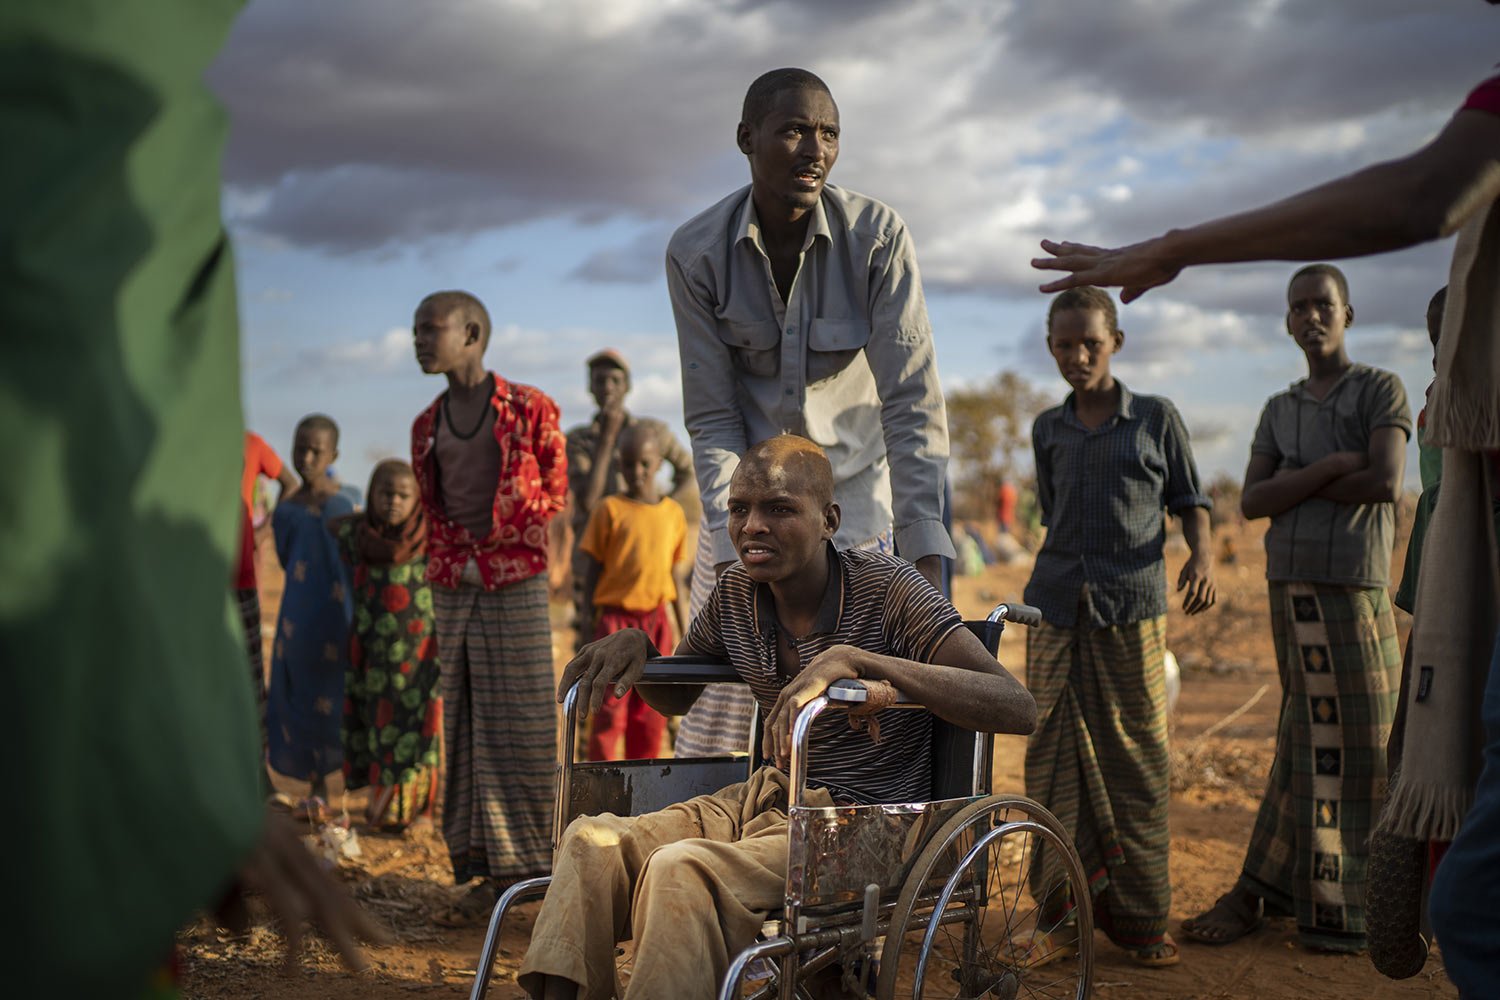  Displaced people who have arrived at a camp wait for plot allocation on the outskirts of Dollow, Somalia, Sept. 19, 2022. (AP Photo/Jerome Delay) 